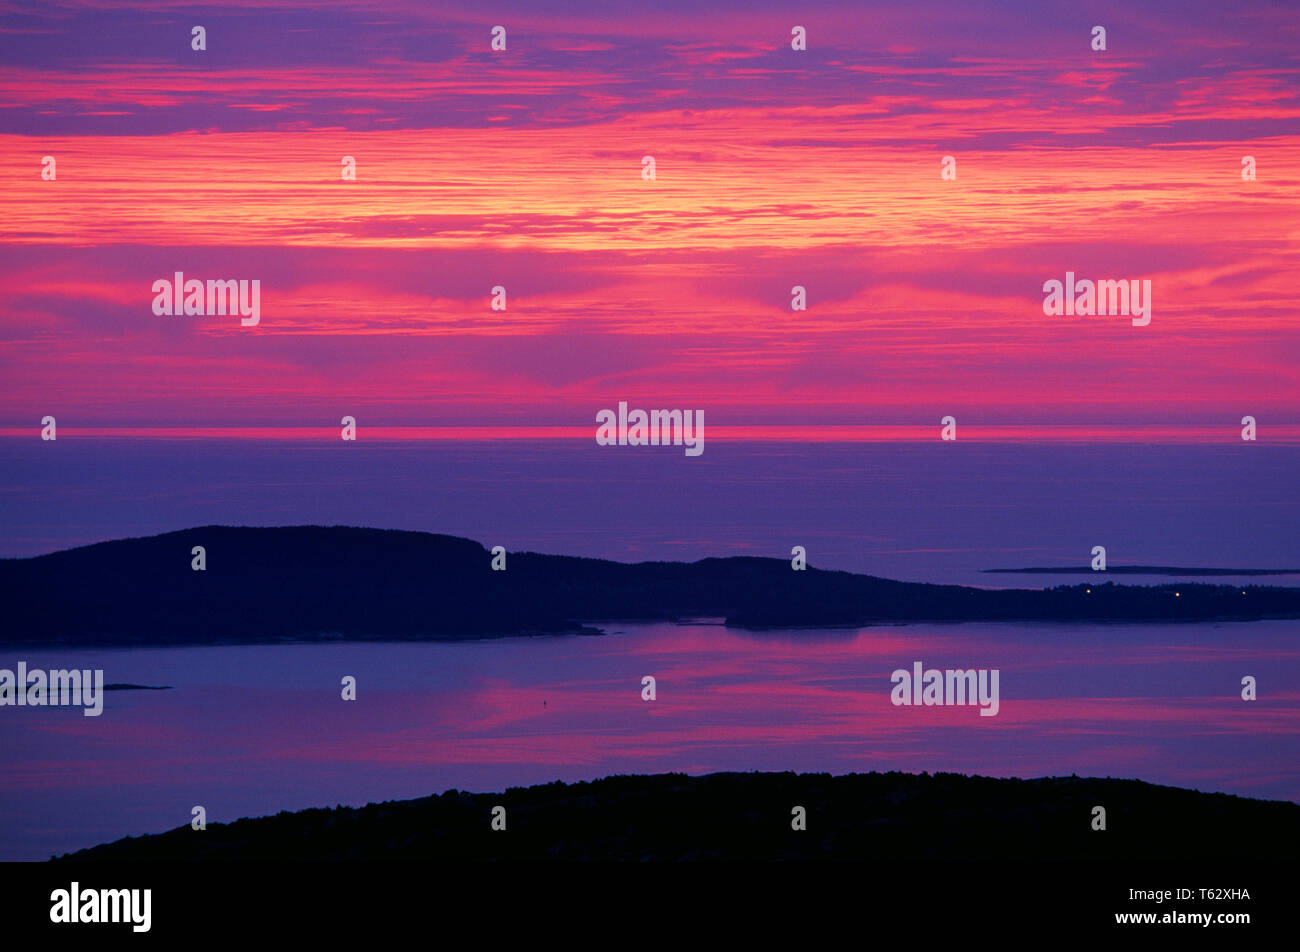 1990s SUNRISE FROM CADILLAC MOUNTAIN ACADIA NATIONAL PARK MAINE USA - kl20769 GER002 HARS EXCITEMENT RECREATION NORTHEAST ACADIA NATIONAL PARK CONCEPTUAL EAST COAST SUNRISE CADILLAC ESCAPE STYLISH NATIONAL PARK LANDSCAPES NEW ENGLAND SCENICS OLD FASHIONED Stock Photo